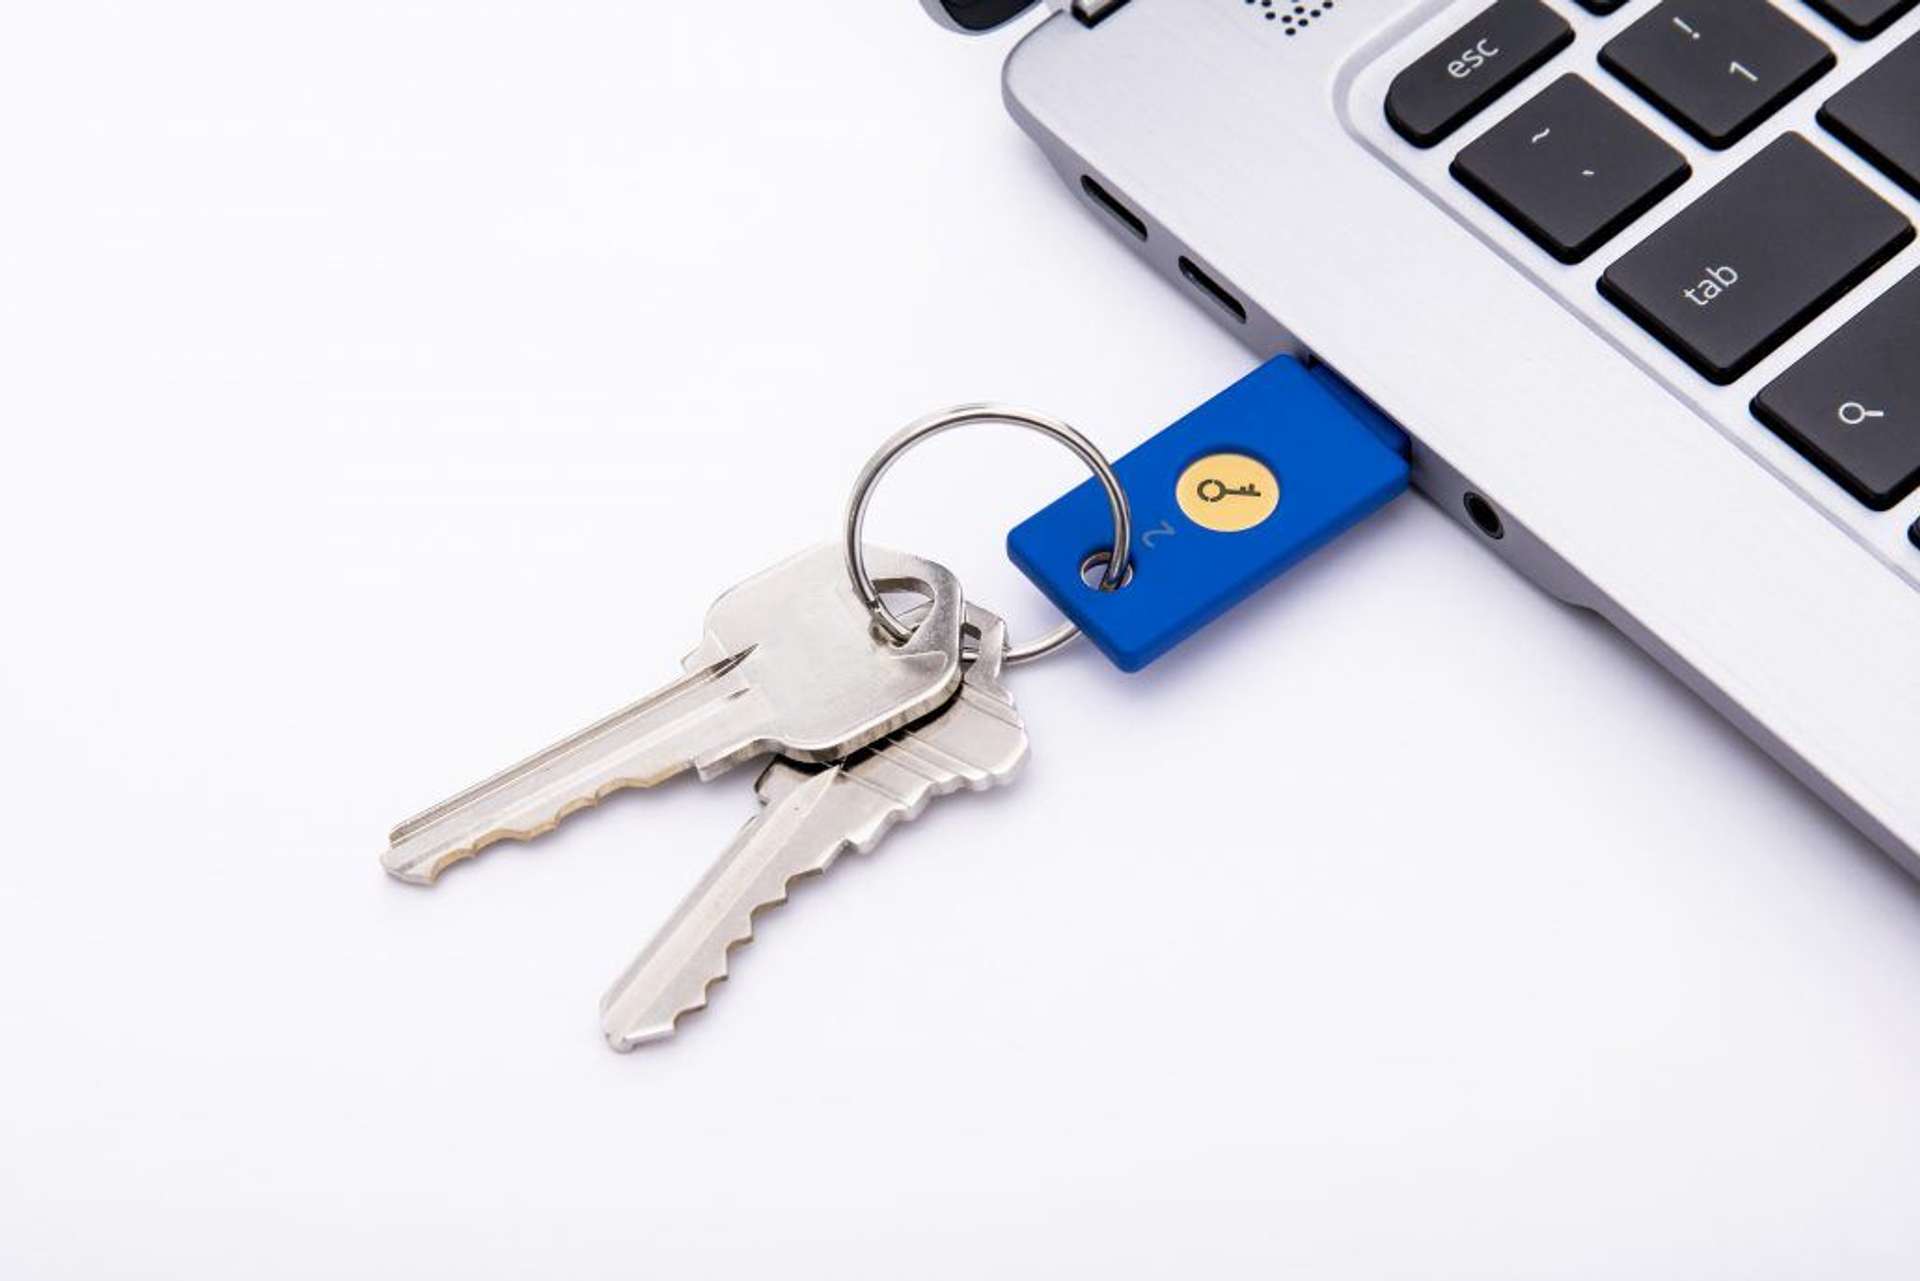 security key yubikey in a computer